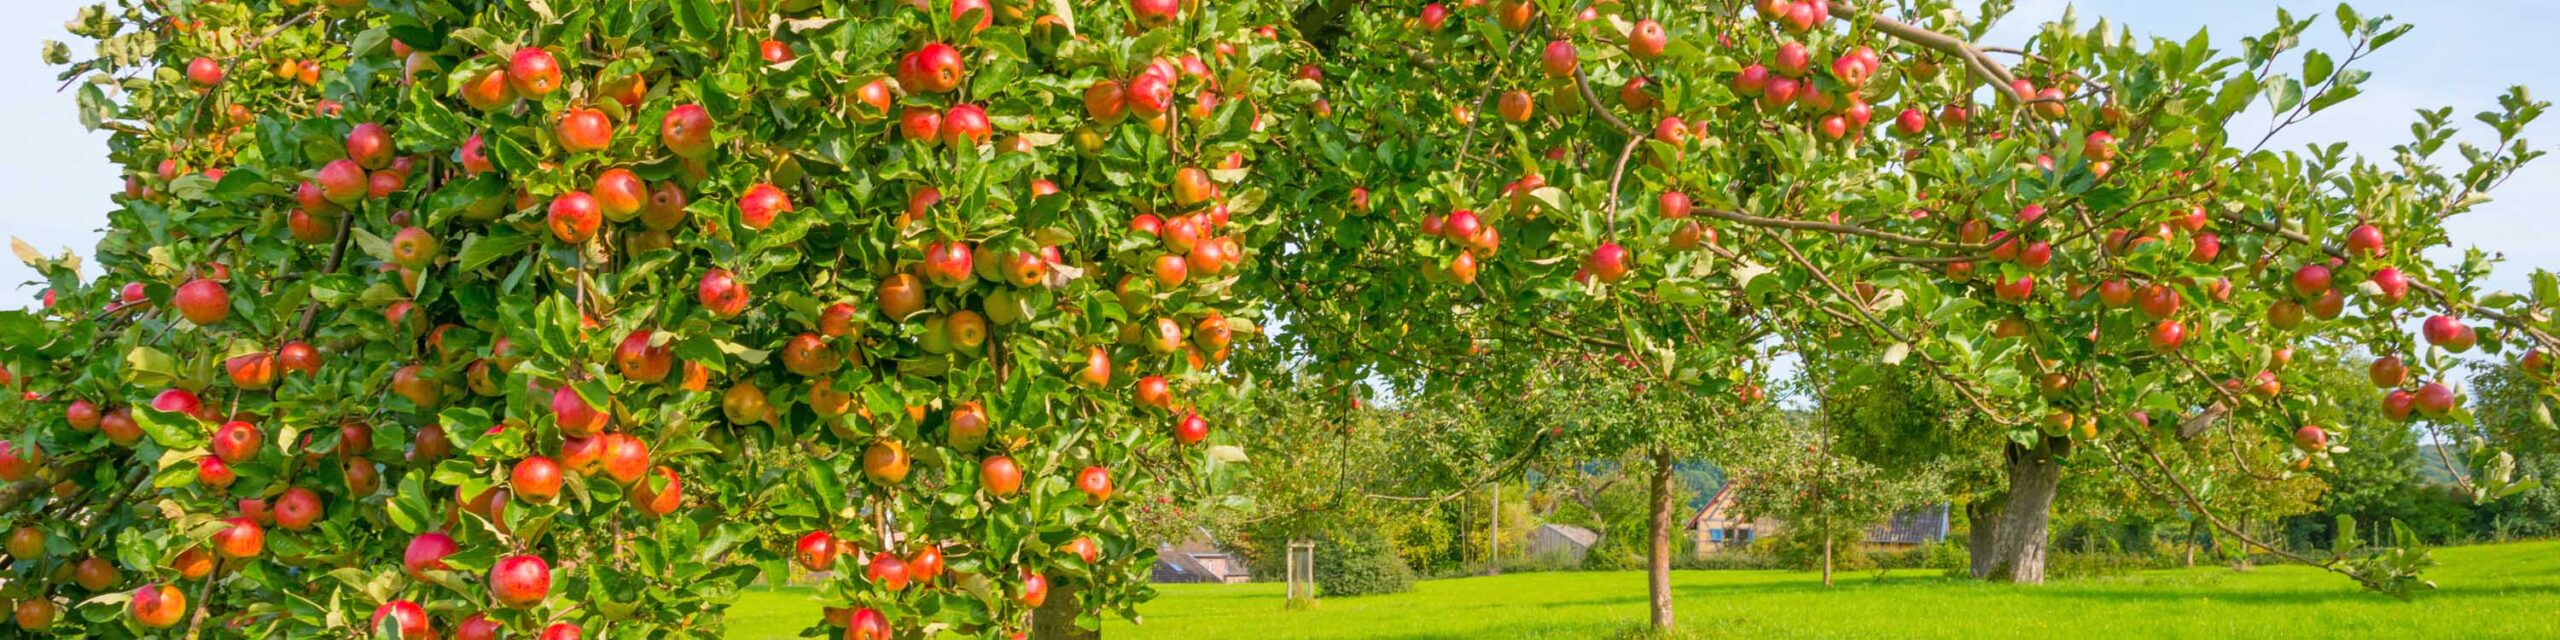 Apple trees with ripe fruit in a grassy orchard.